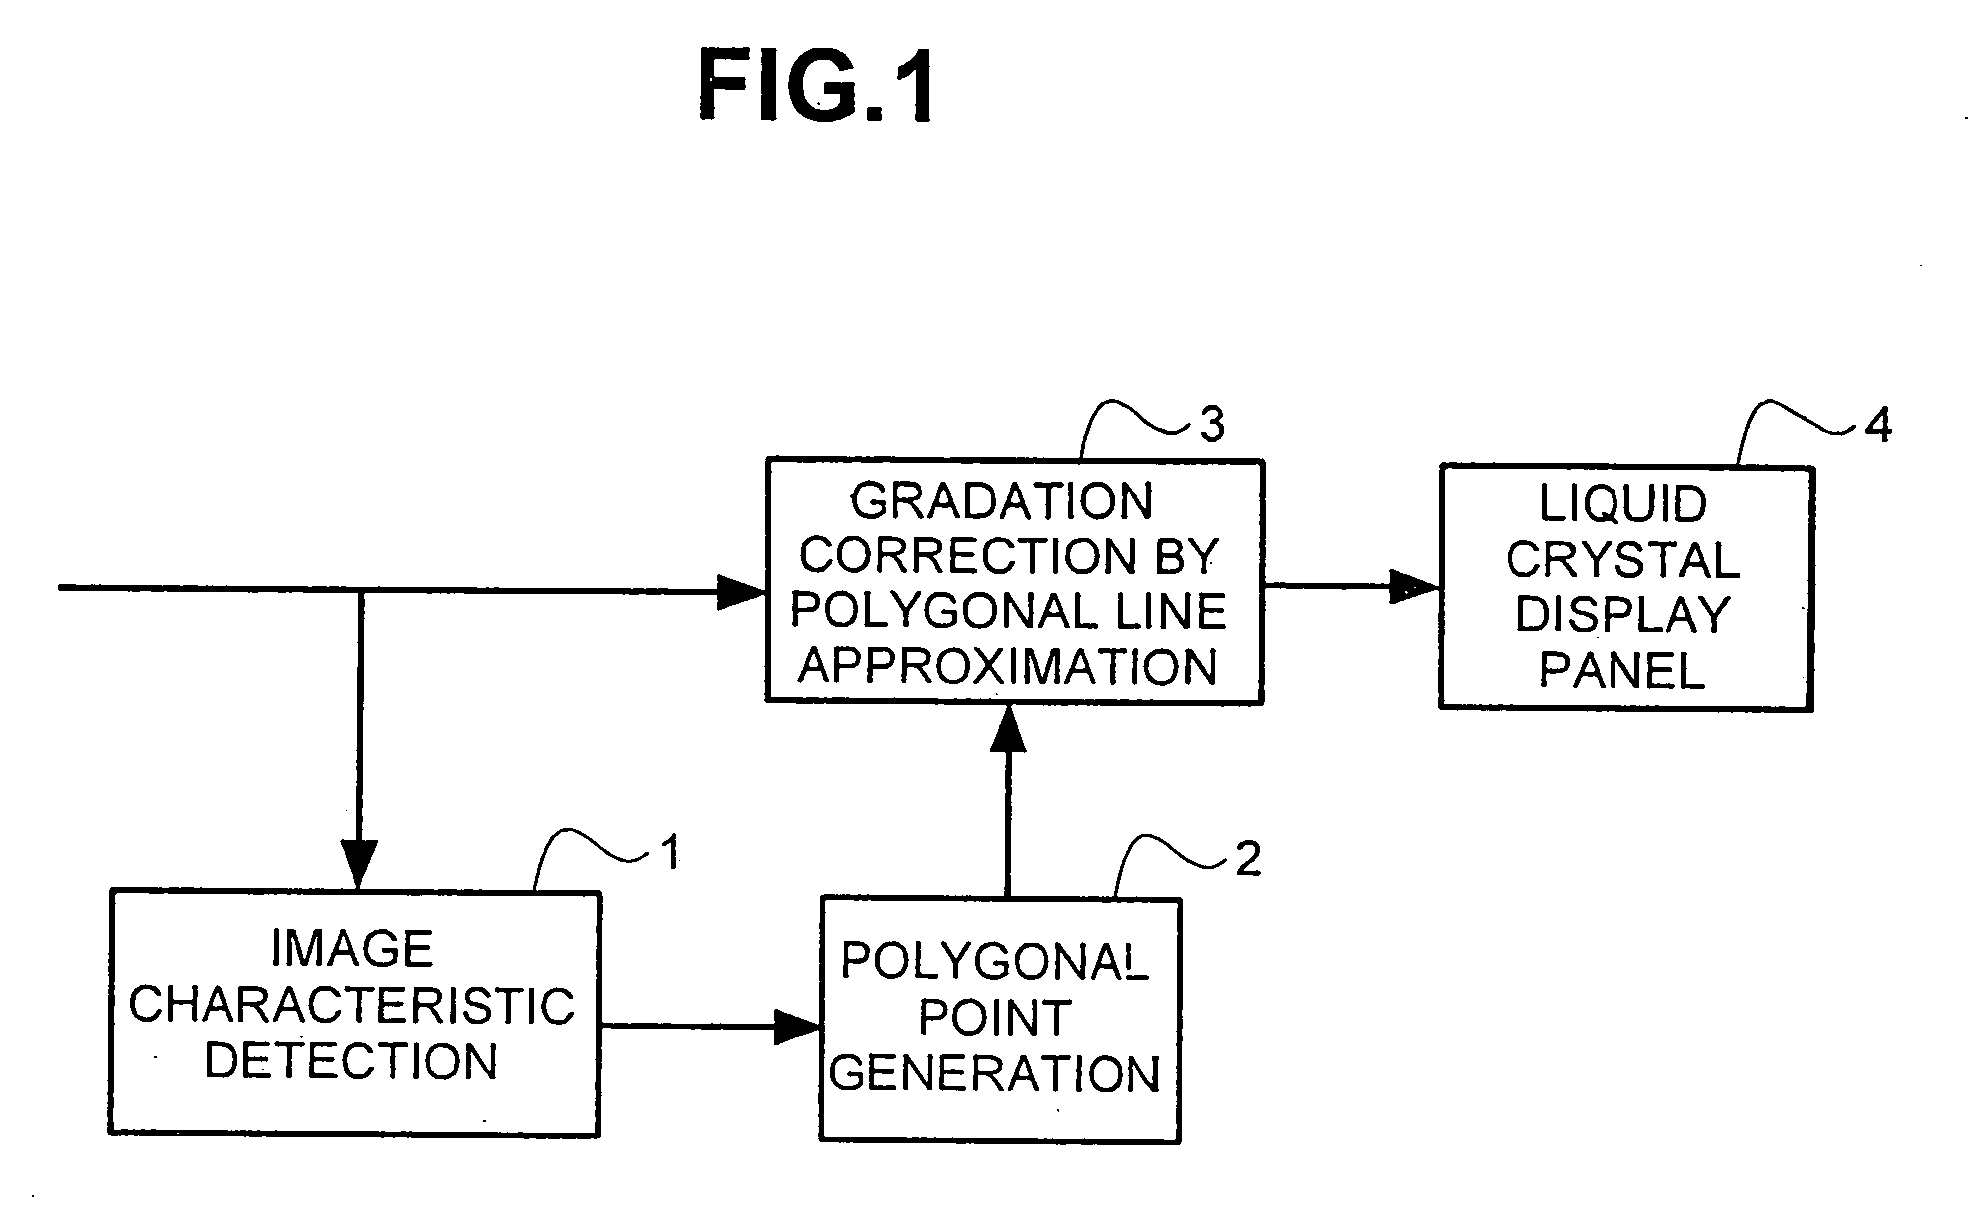 Liquid crystal display device for displaying video data